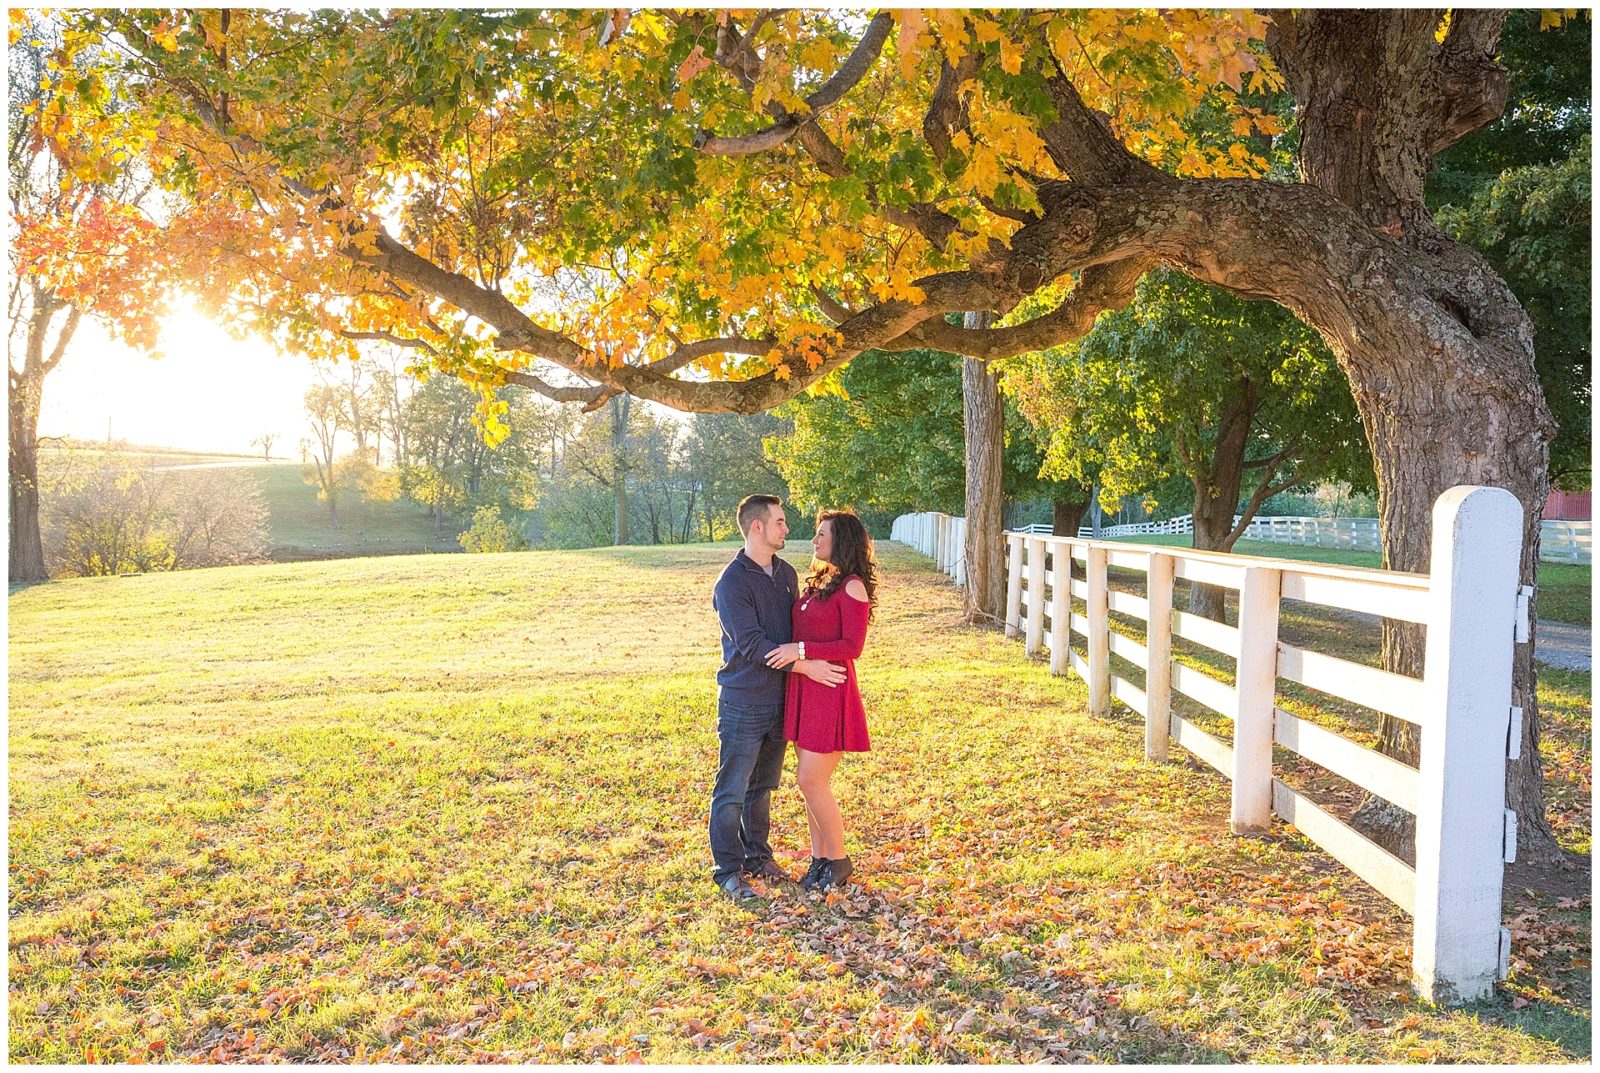 Fall Engagement Session at Shaker Village in Harrodsburg, Kentucky on October 23, 2016. Engagement Photos by: Kevin and Anna Photography www.kevinandannaweddings.com